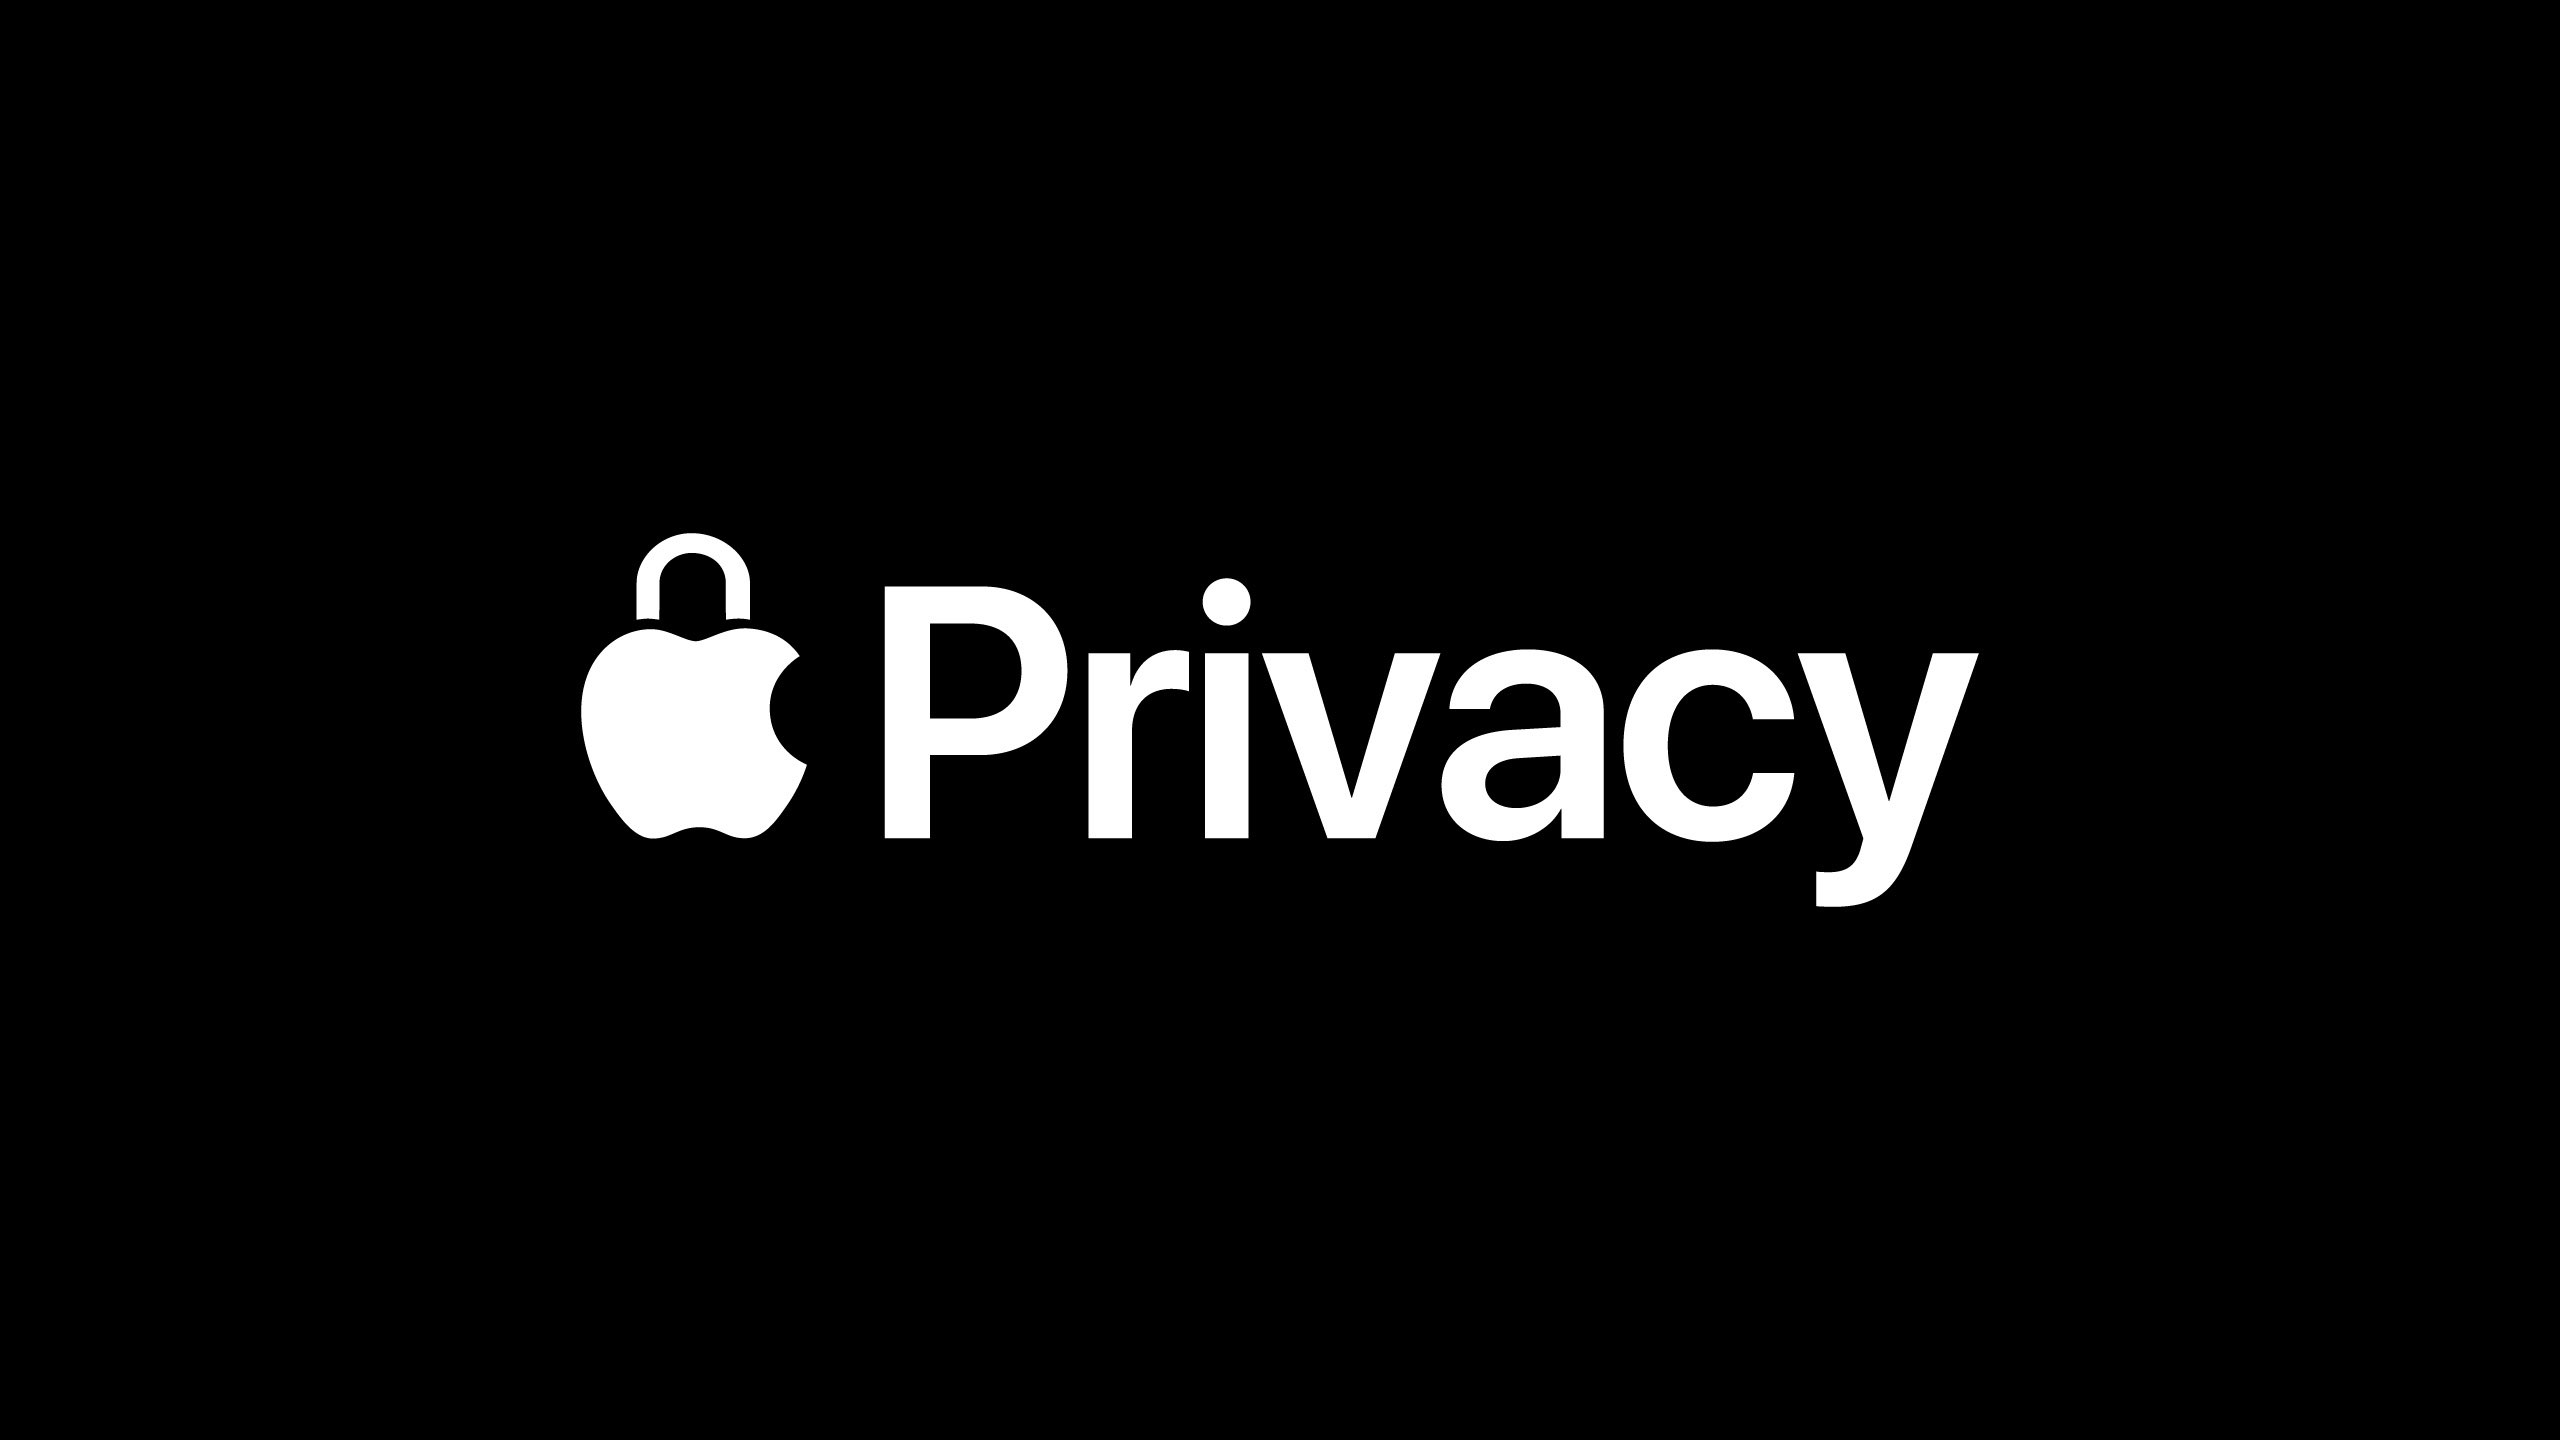 A screenshot showing the Apple logo with a lock icon and the word "Privacy" set against an all-black background